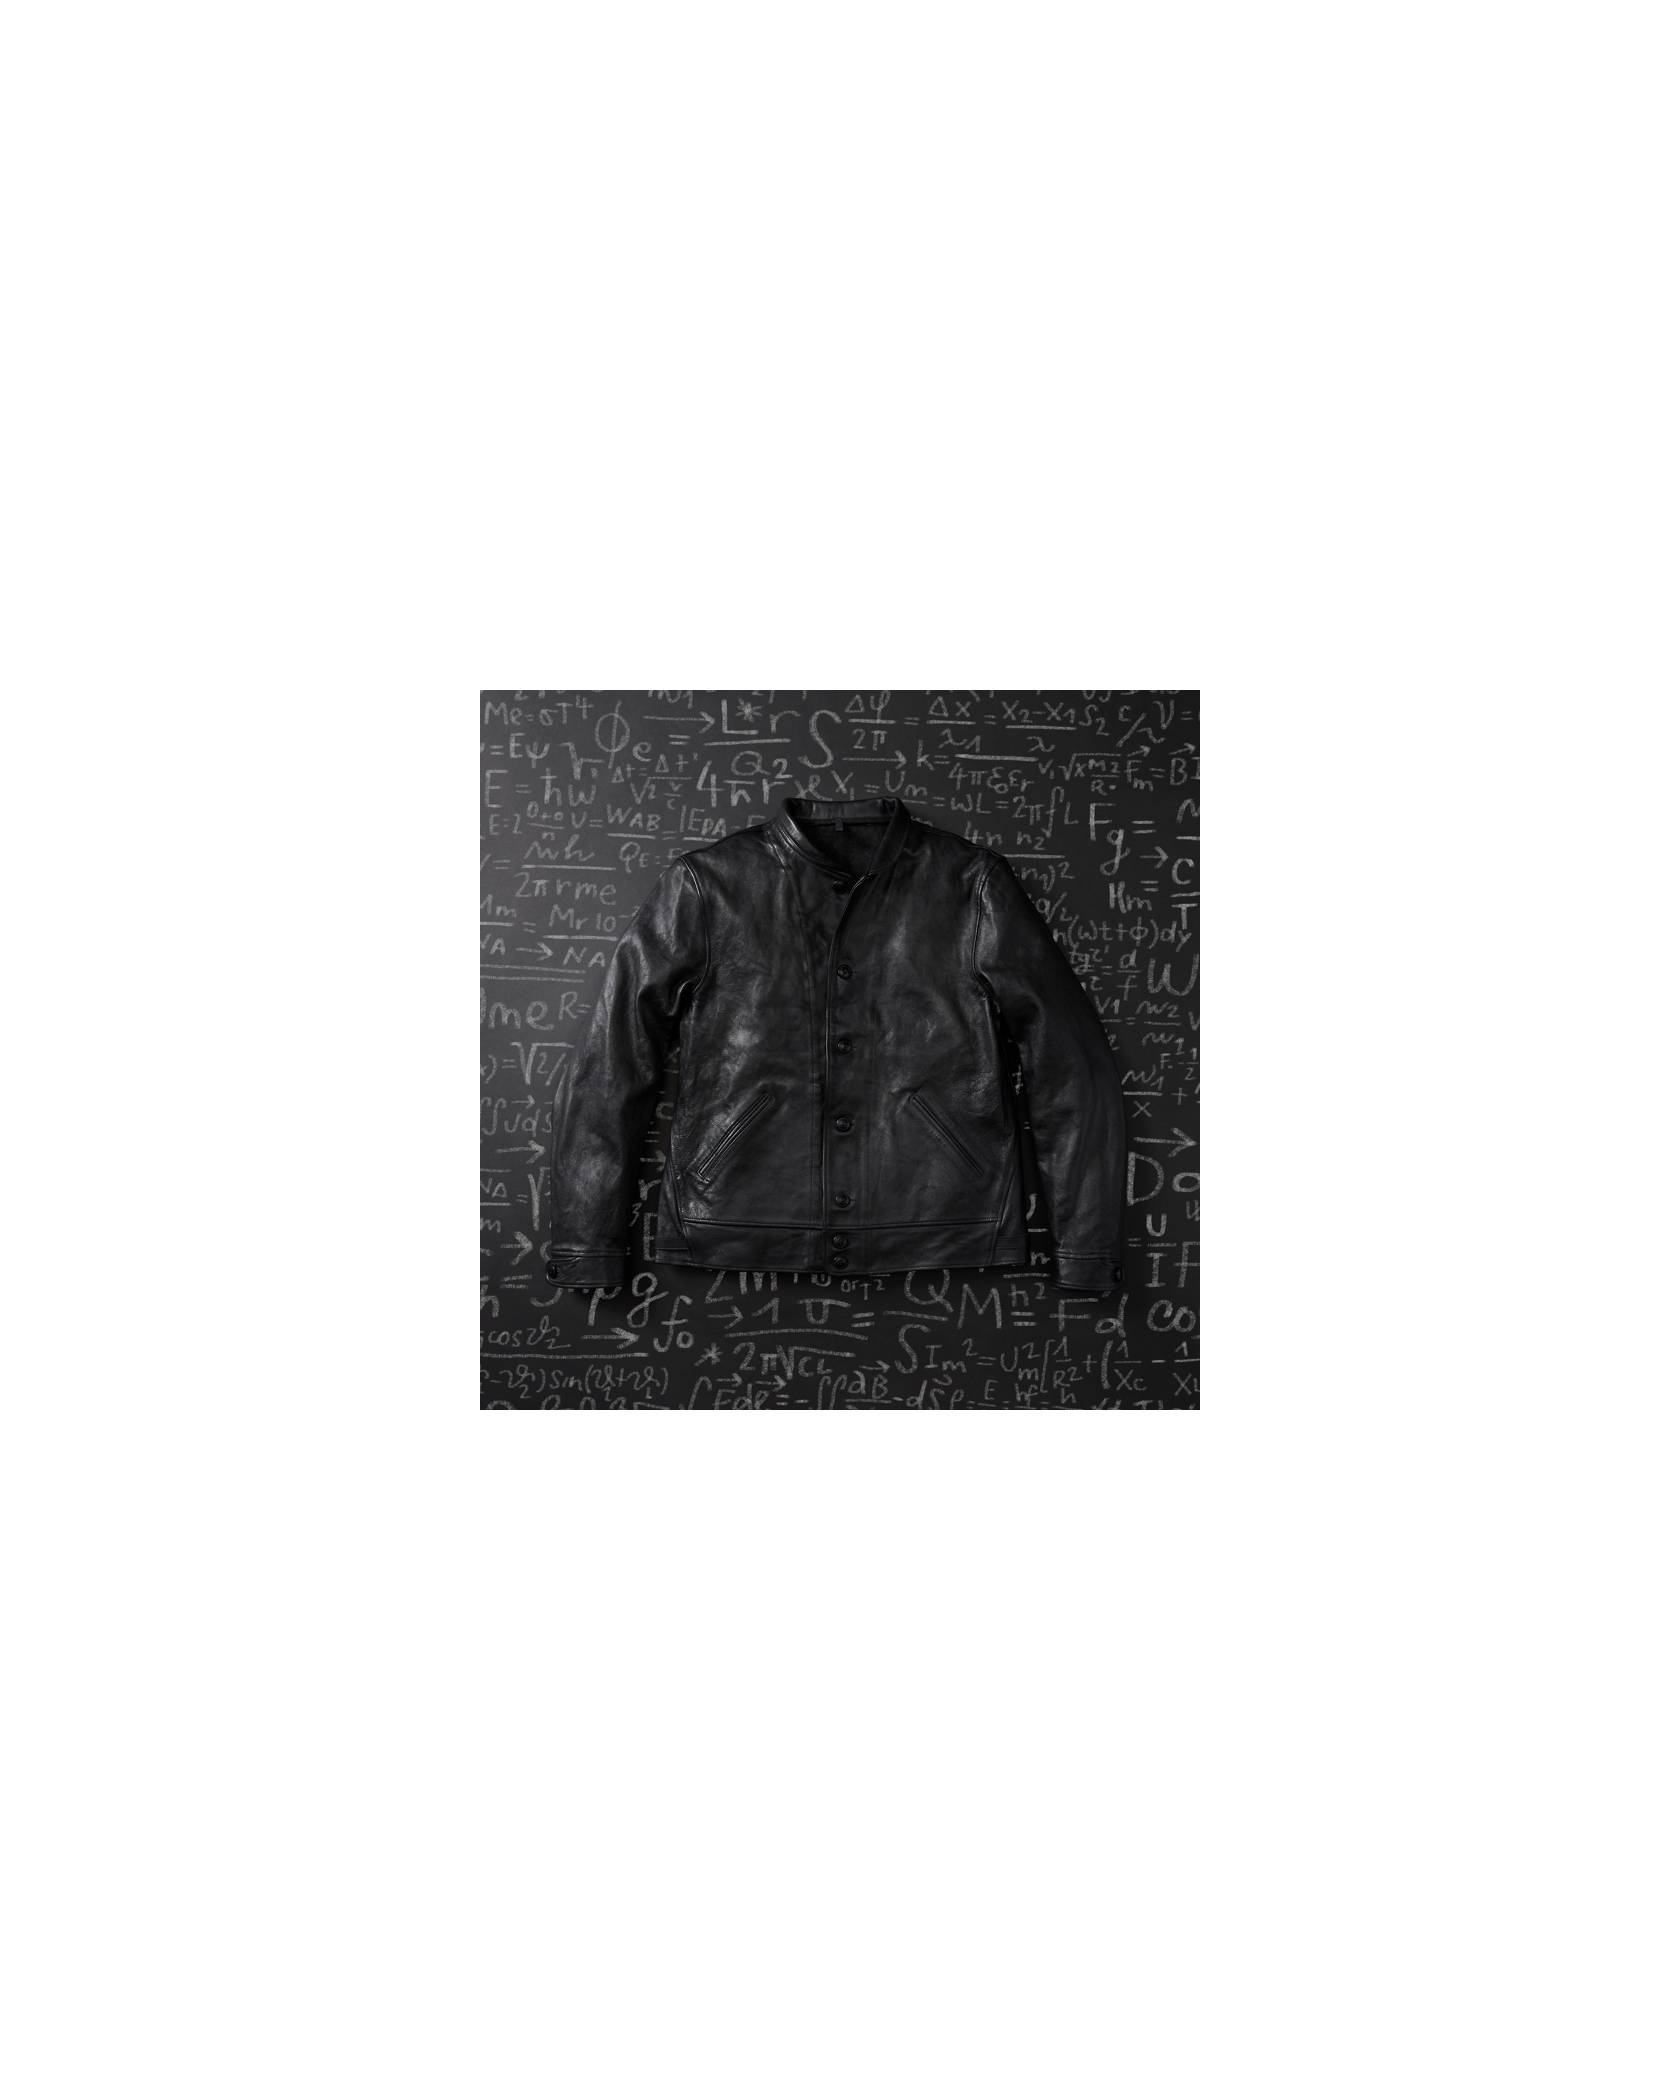 Front image of Einstein's black leather jacket laying on top of a chalkboard with numbers and equations written in white chalk.